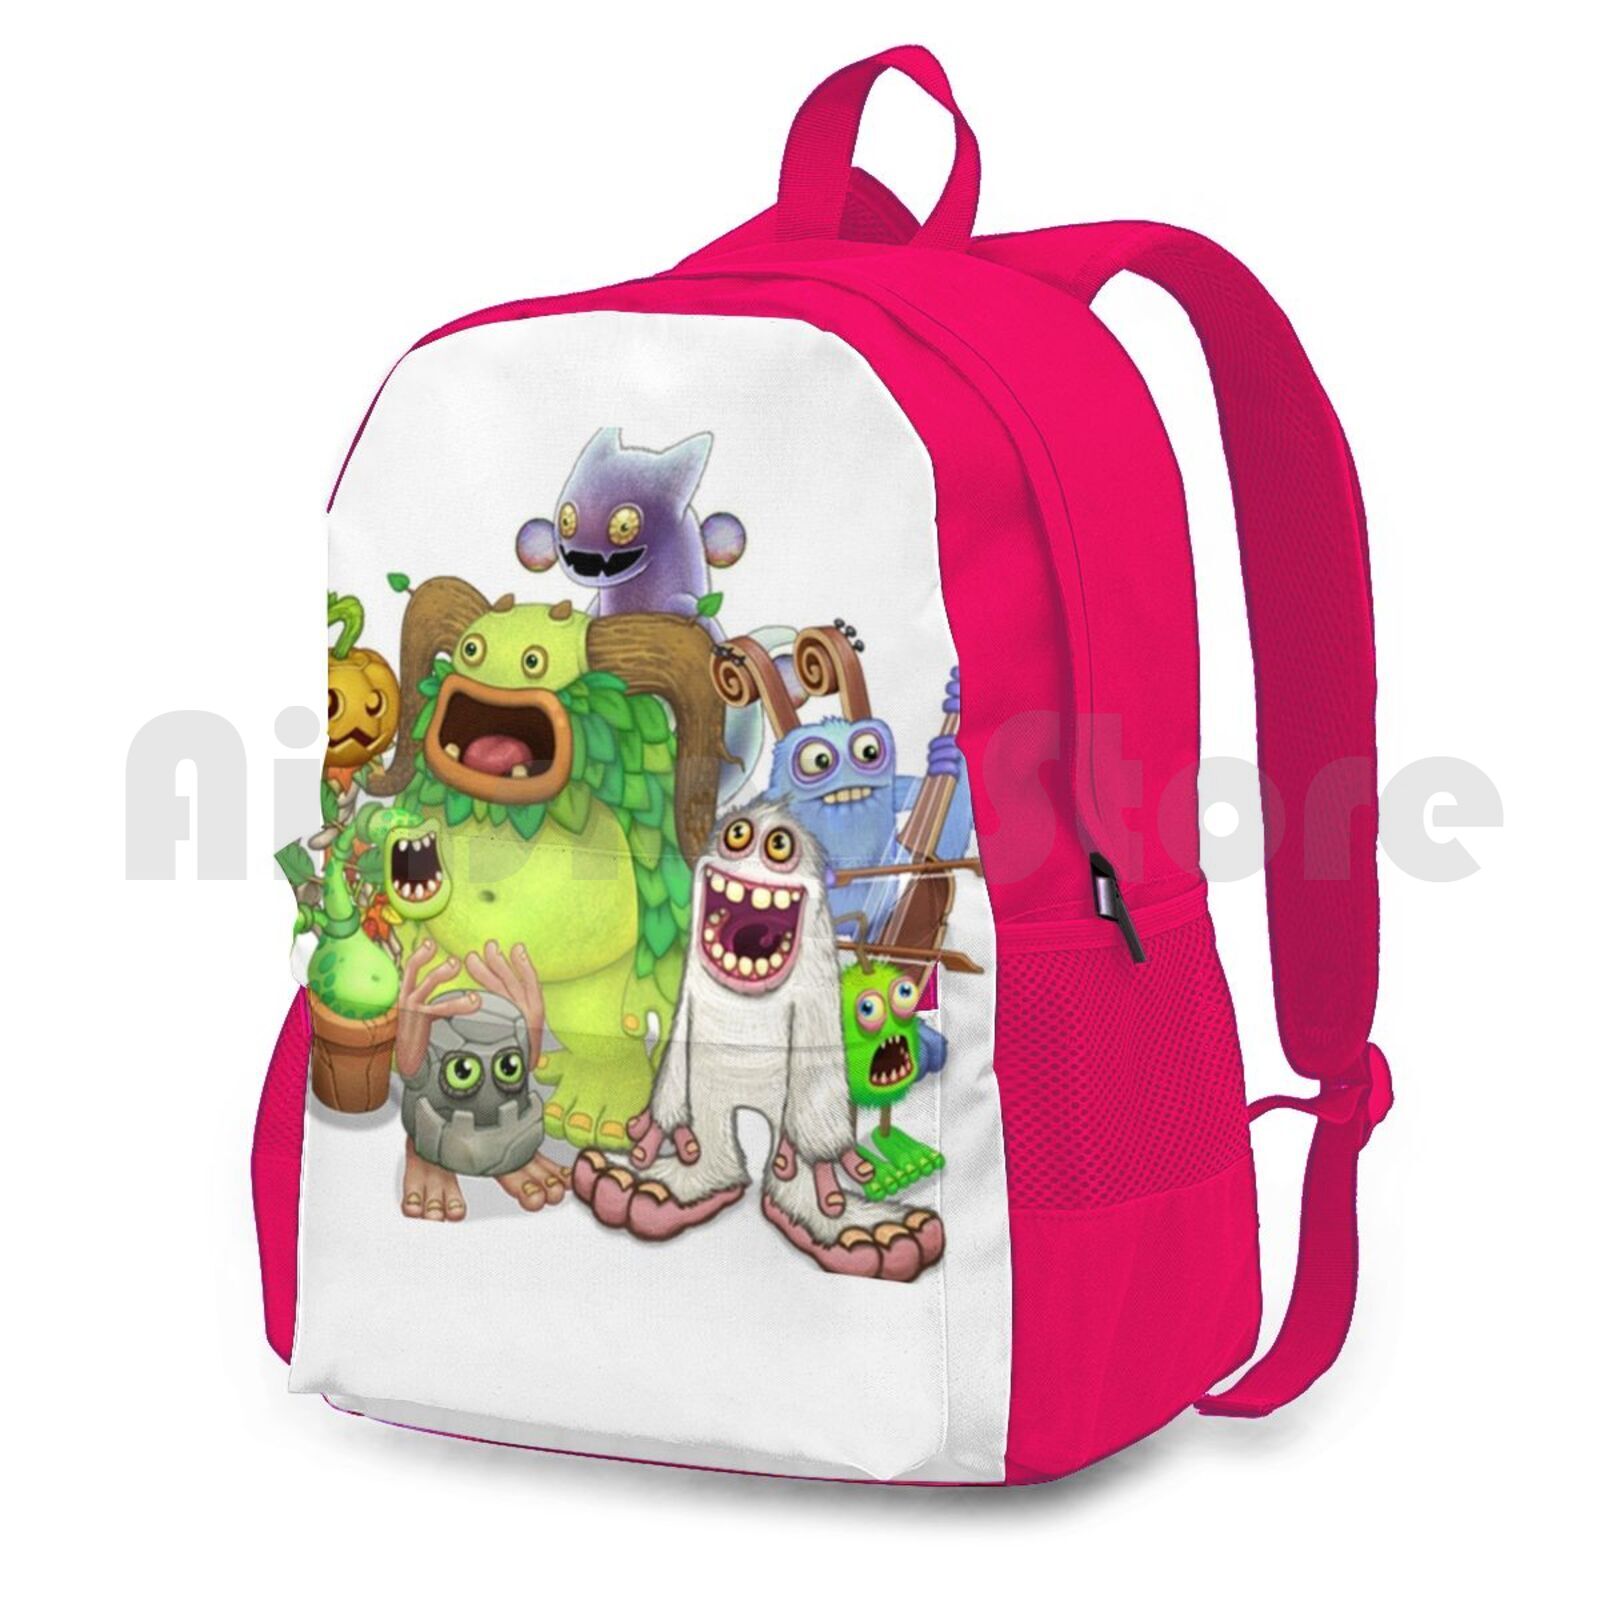 My Singing Monsters Characters Outdoor Hiking Backpack Riding Climbing Sports Bag My Singing Monsters My Singing 2 - My Singing Monsters Plush